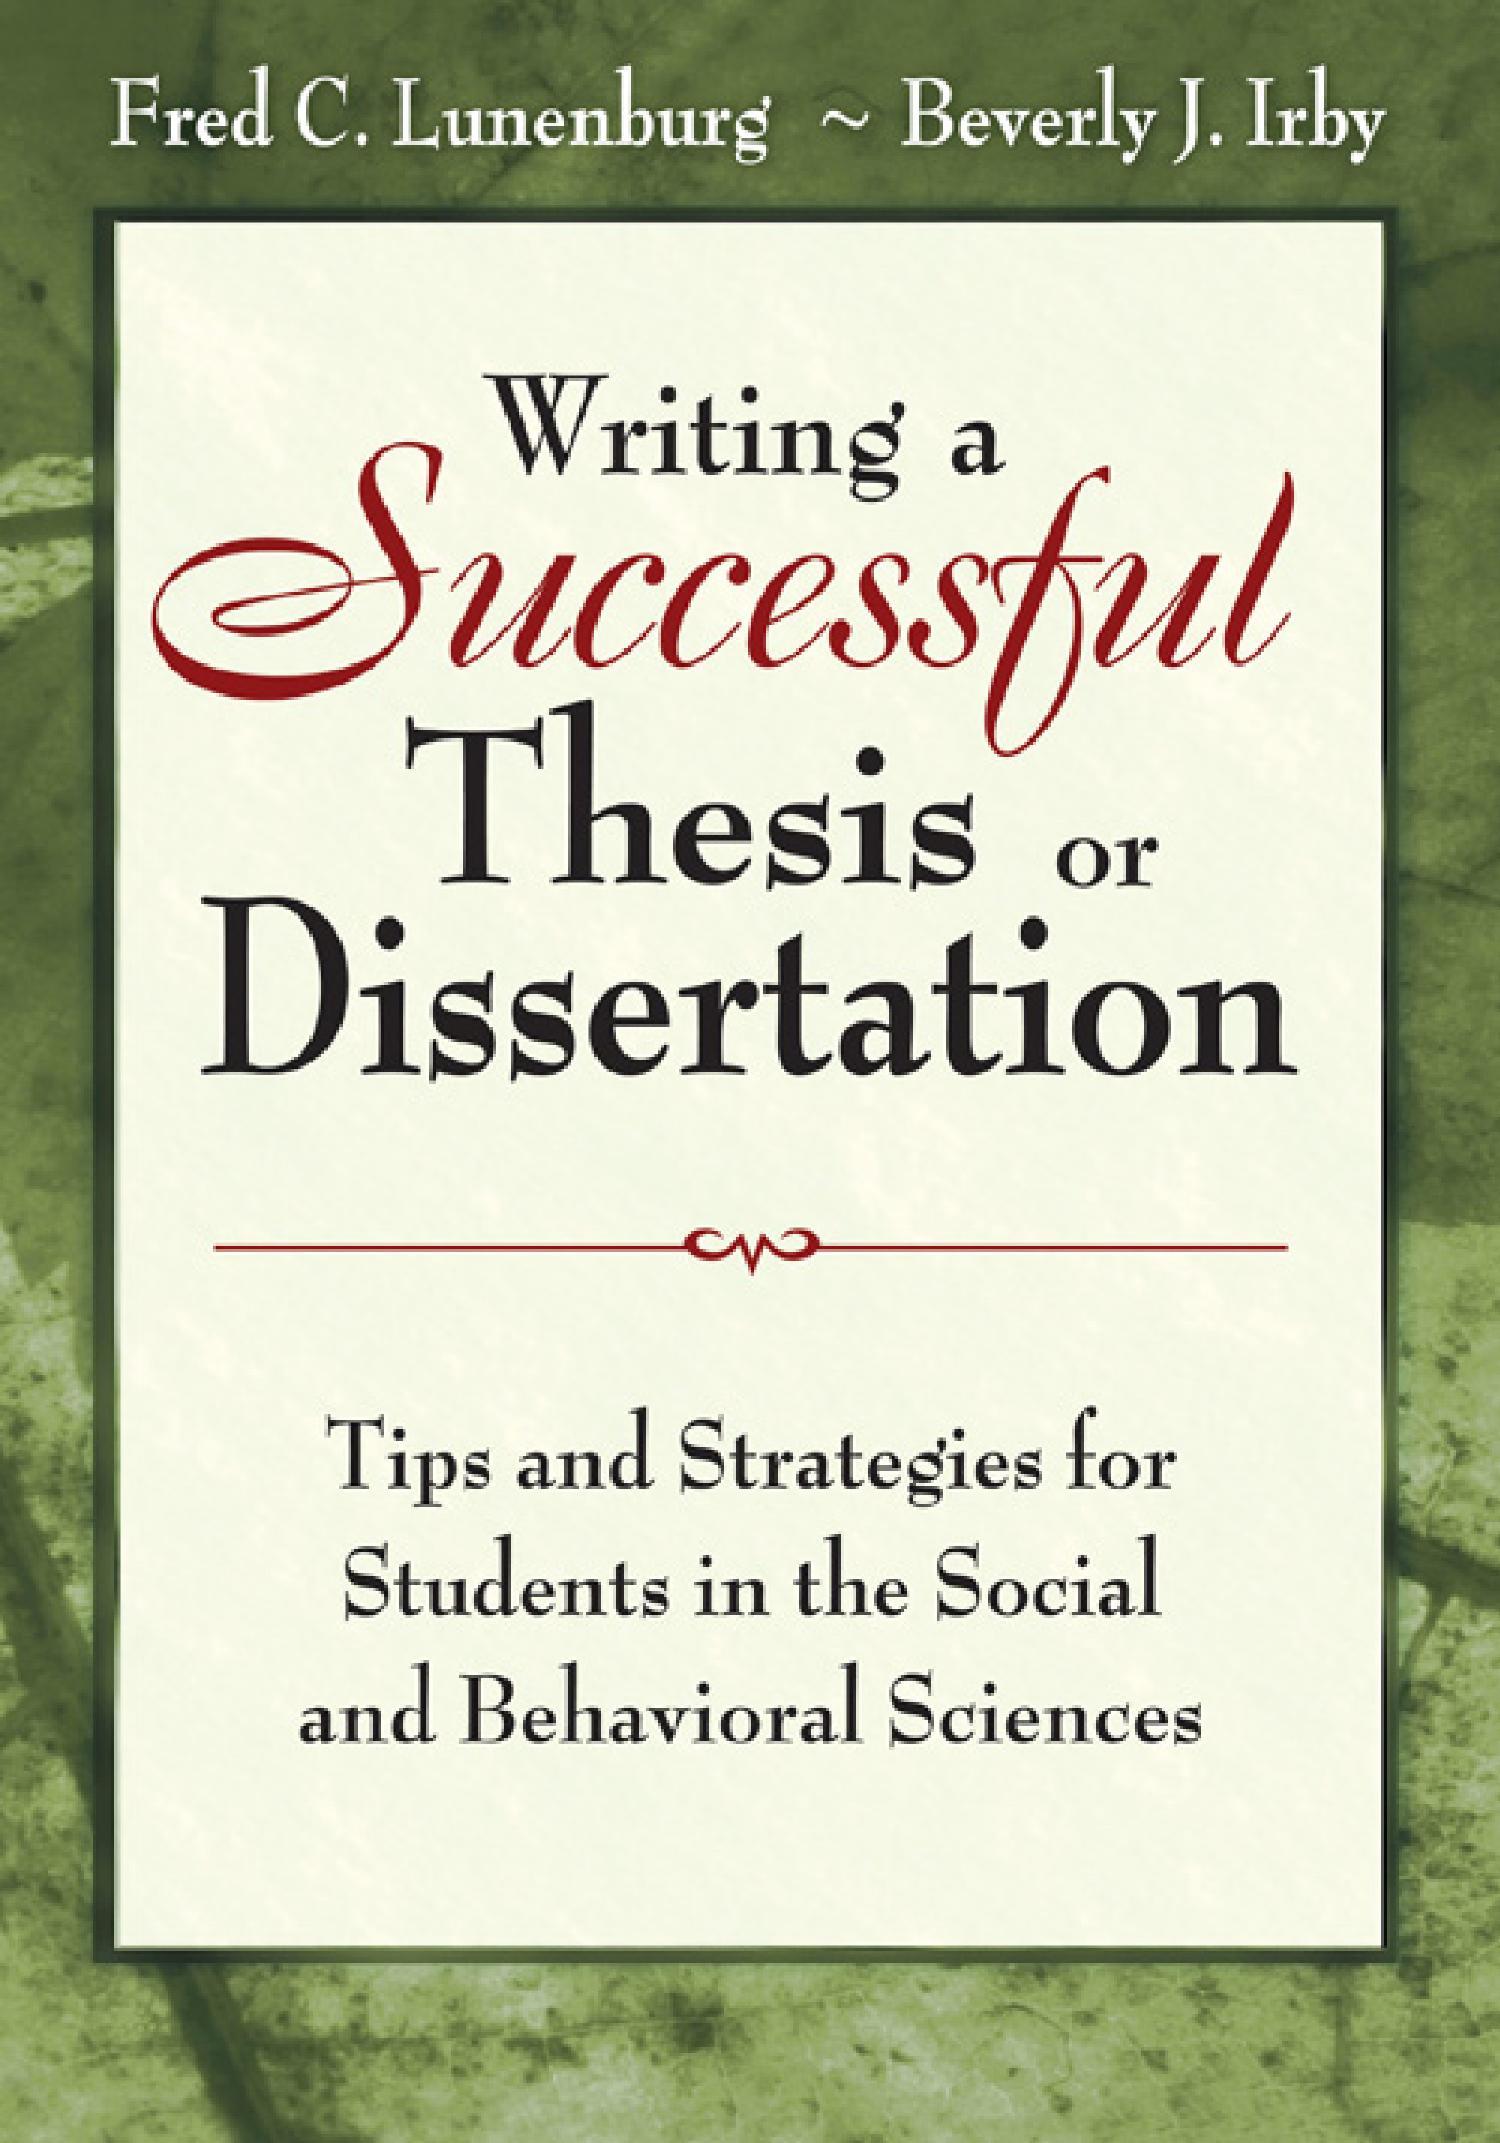 writing the winning thesis or dissertation pdf